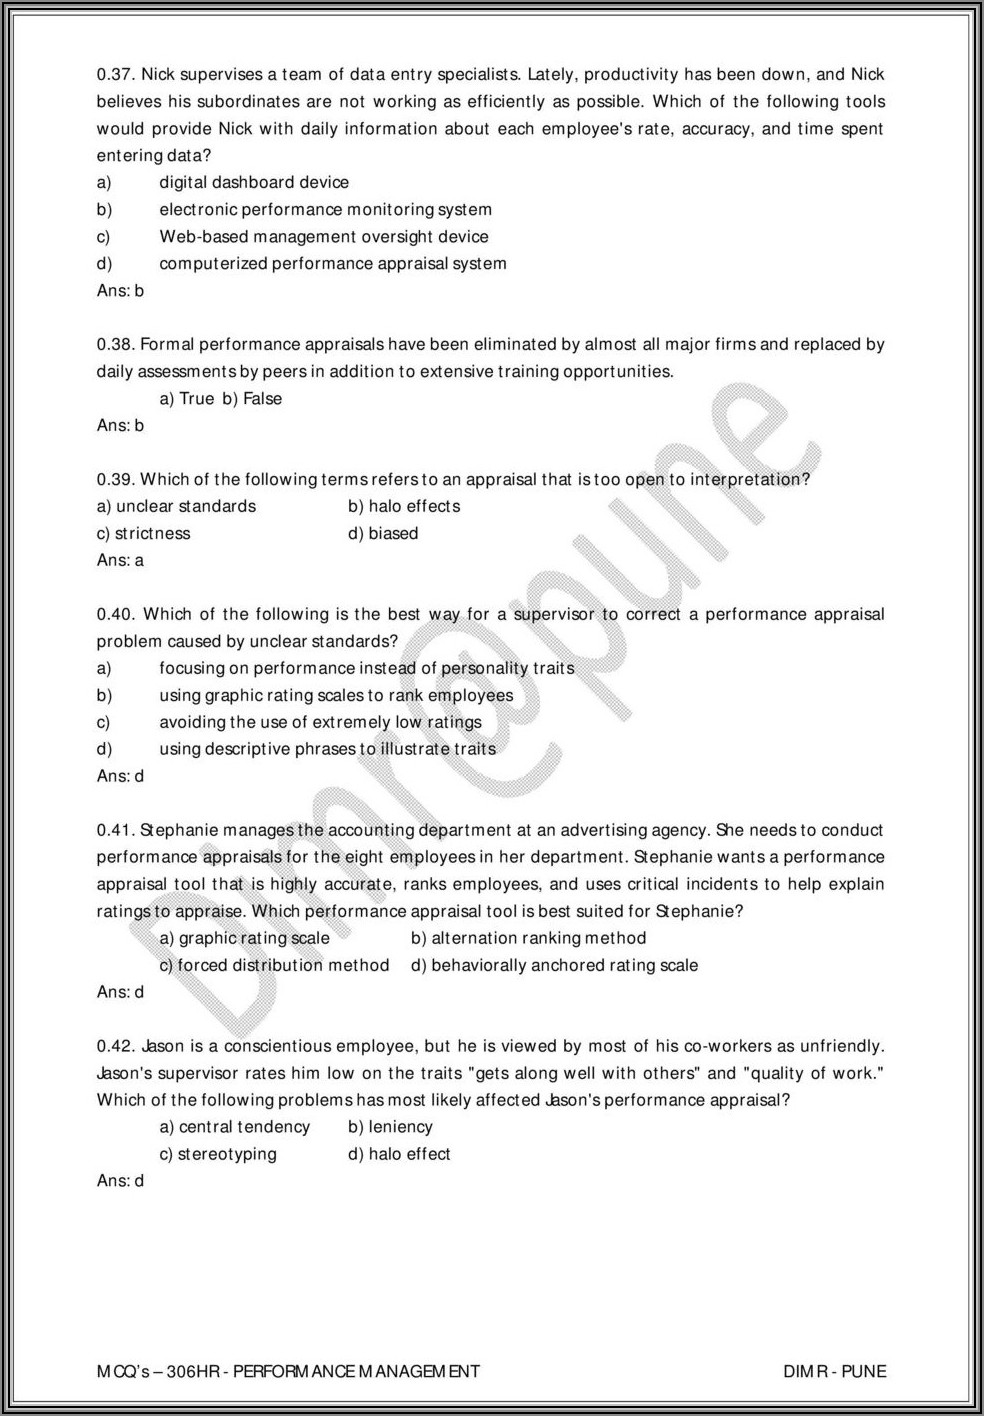 Annual Performance Appraisal Form Answers